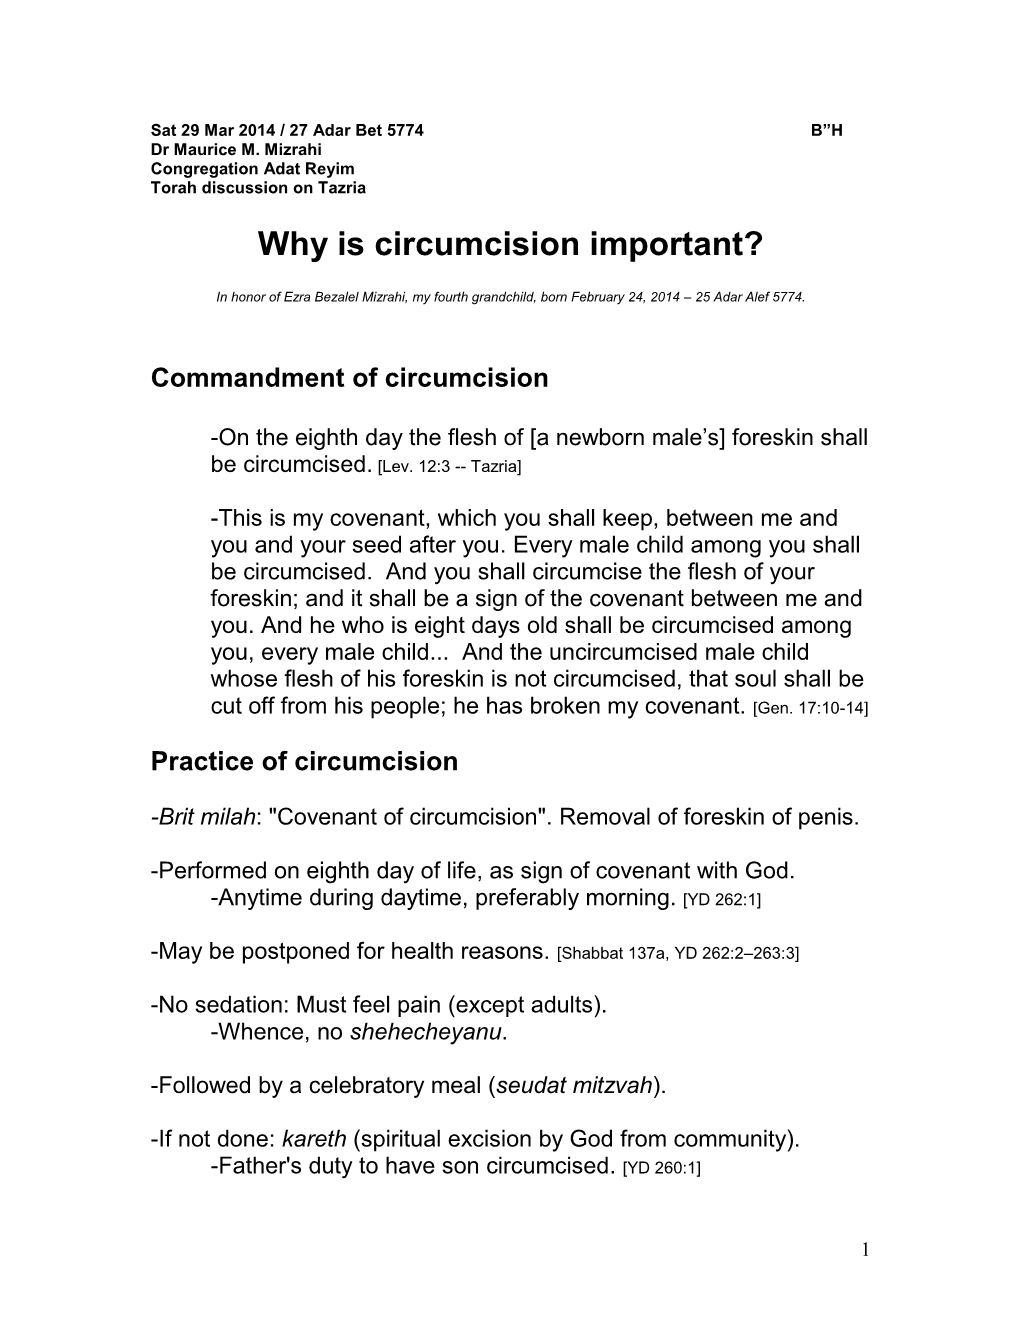 Why Is Circumcision Important?